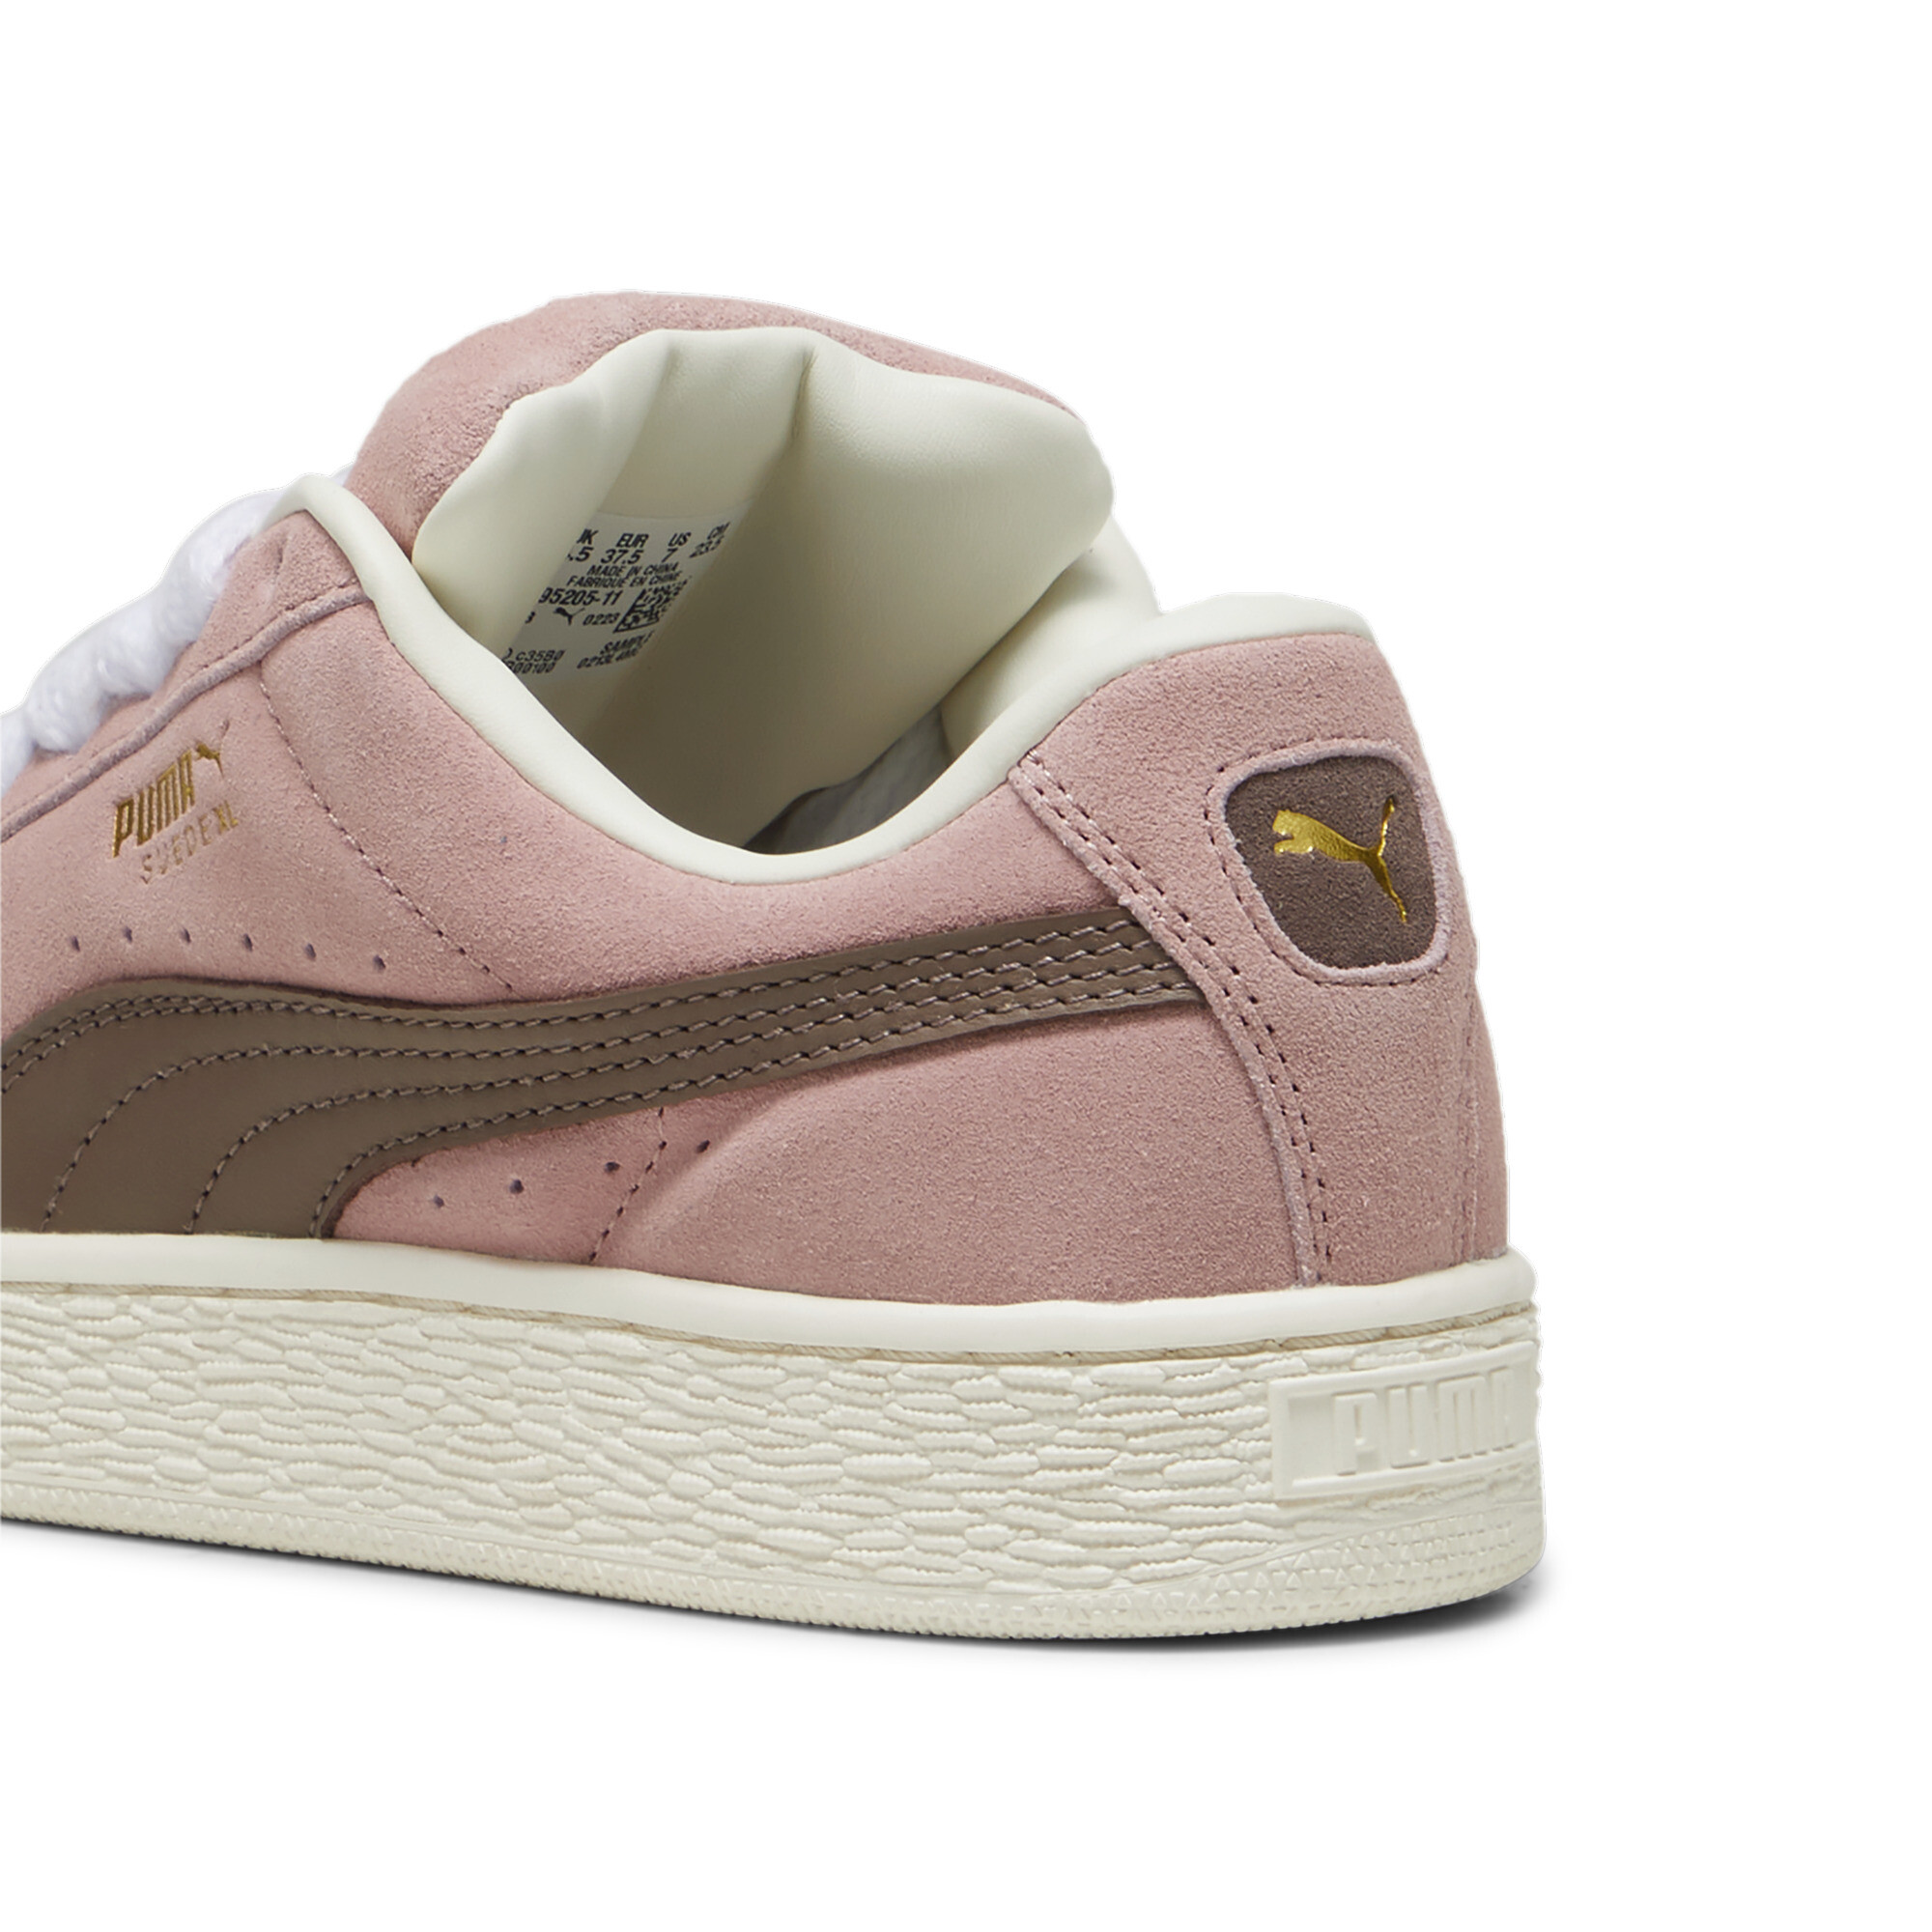 Puma Suede XL Sneakers Unisex, Pink, Size 44.5, Shoes